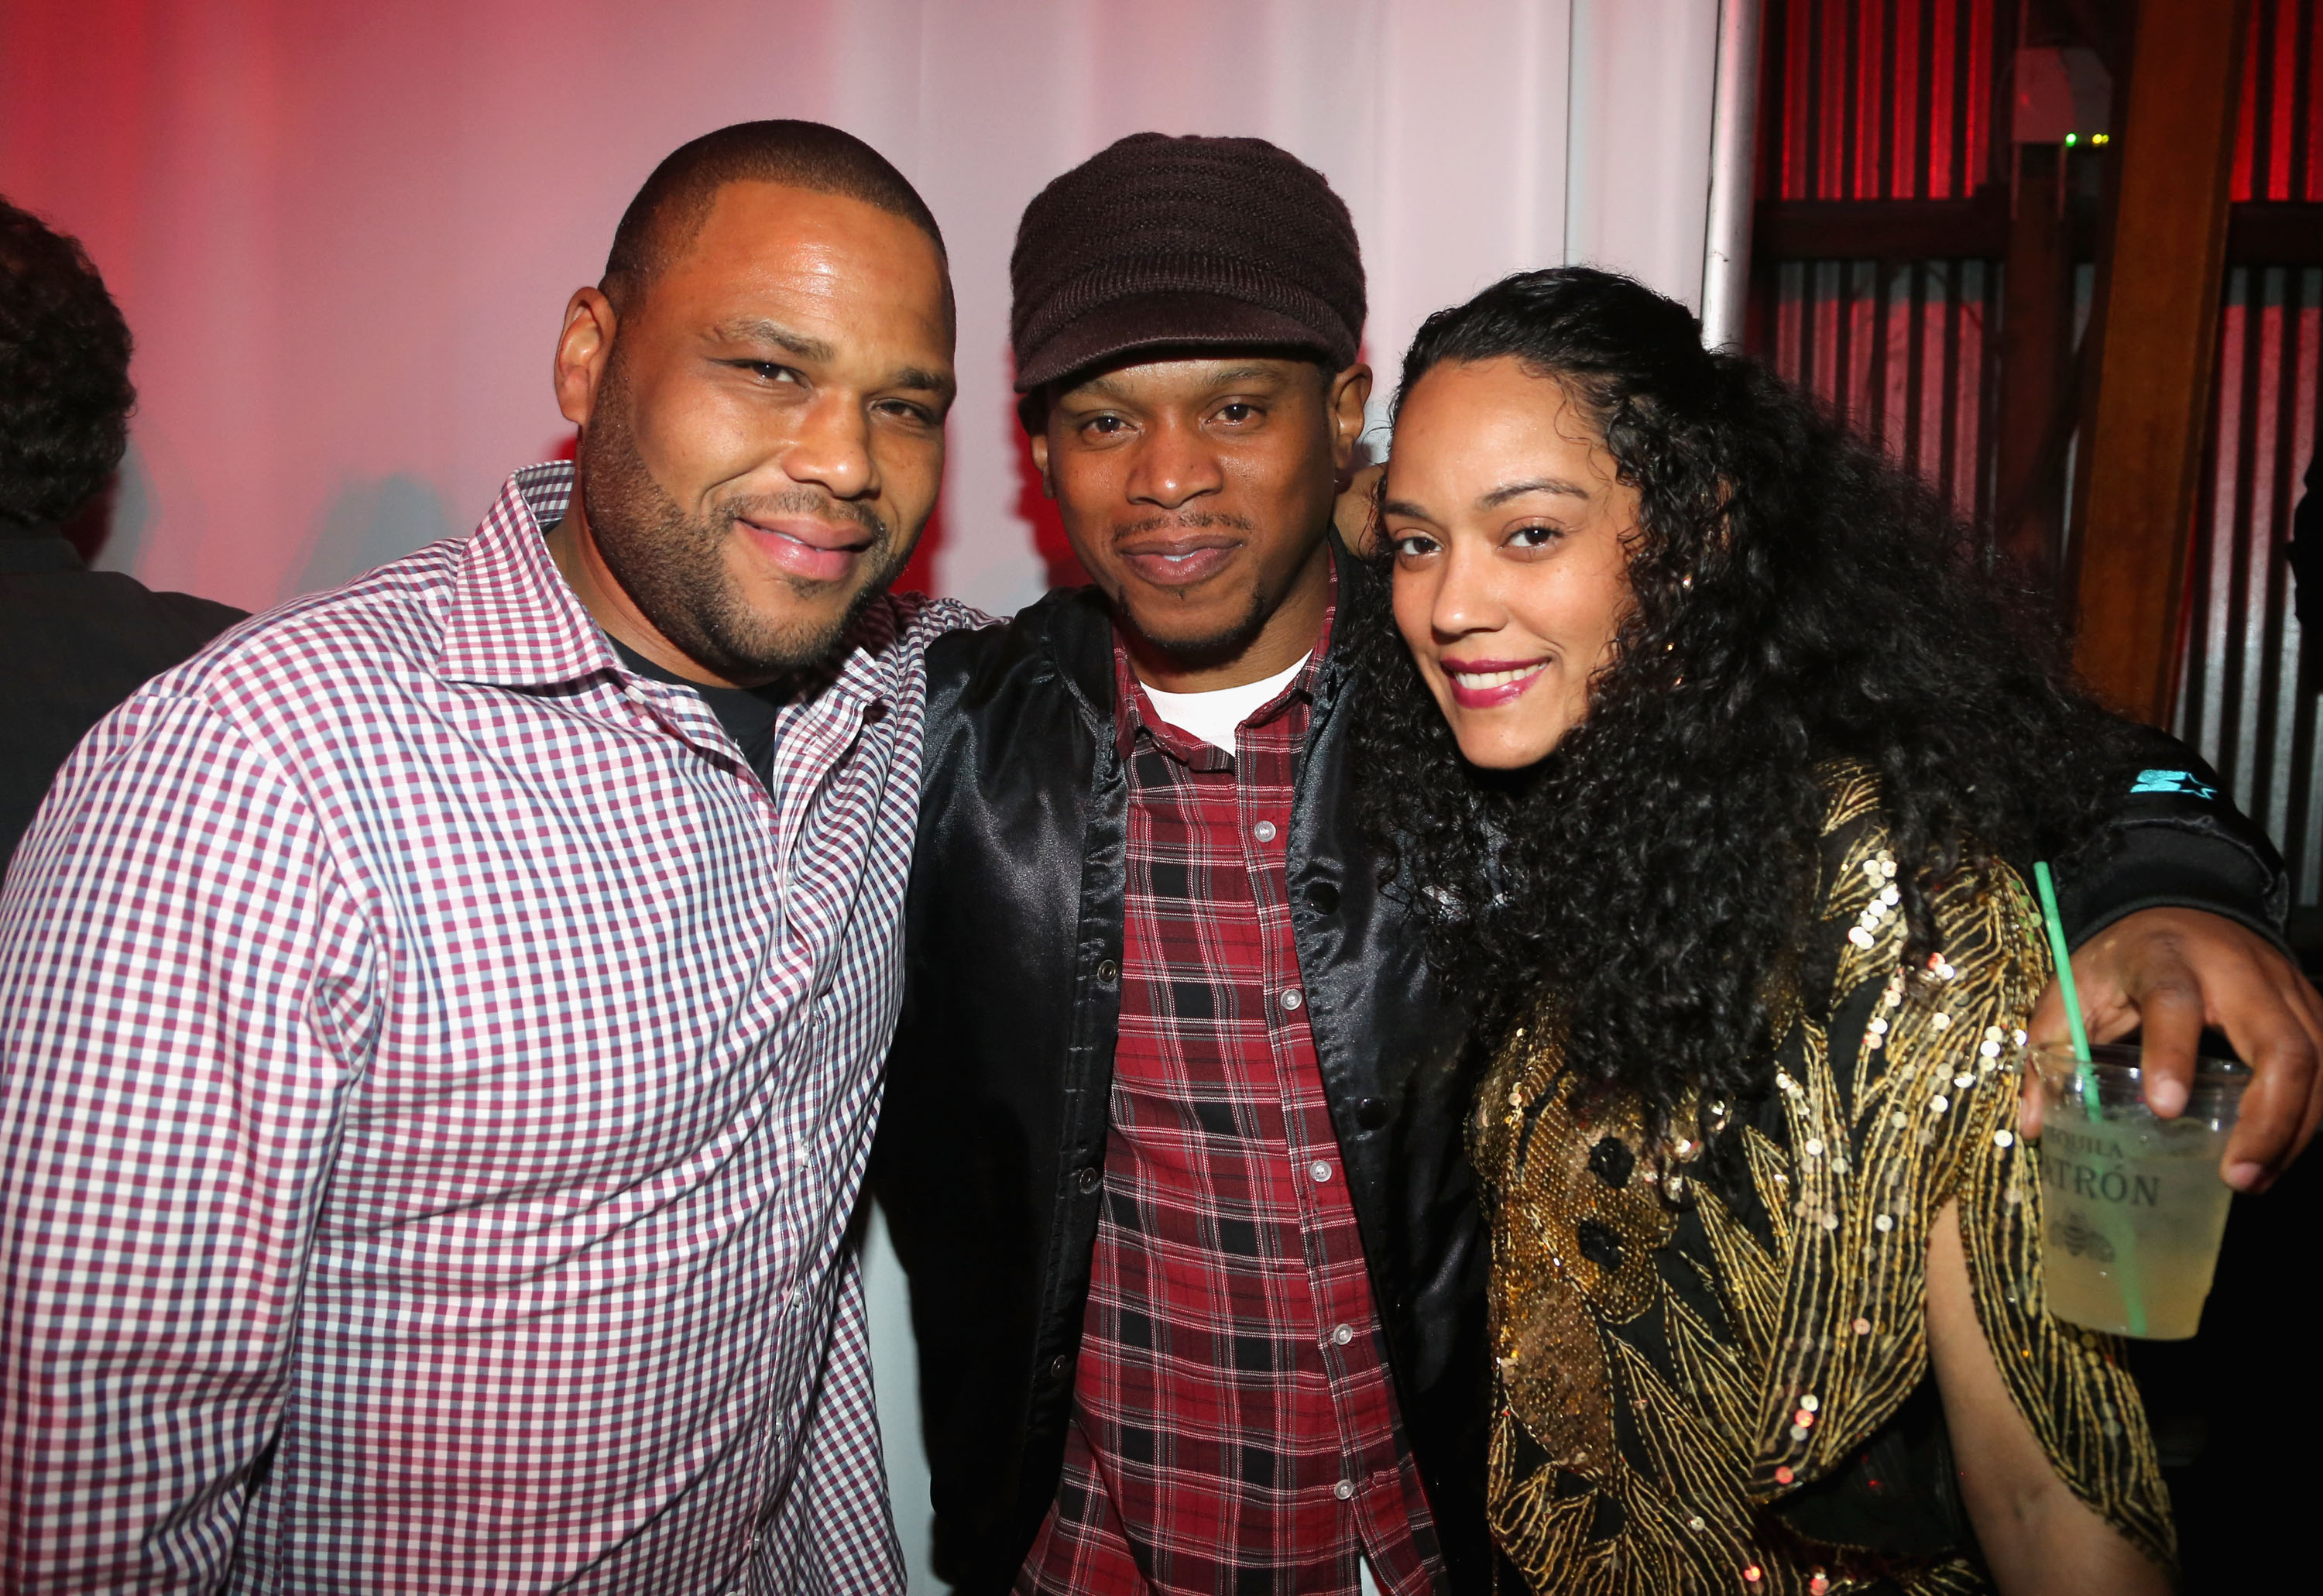 NEW ORLEANS, LA - FEBRUARY 02:  Actor Anthony Anderson, MTV's Sway Calloway and guest attend The Maxim Party With "Gears of War: Judgment" For XBOX 360, FOX Sports & Starter Presented by Patron Tequila at Second Line Warehouse on February 1, 2013 in New Orleans, Louisiana.  (Photo by Tasos Katopodis/Getty Images for Maxim)